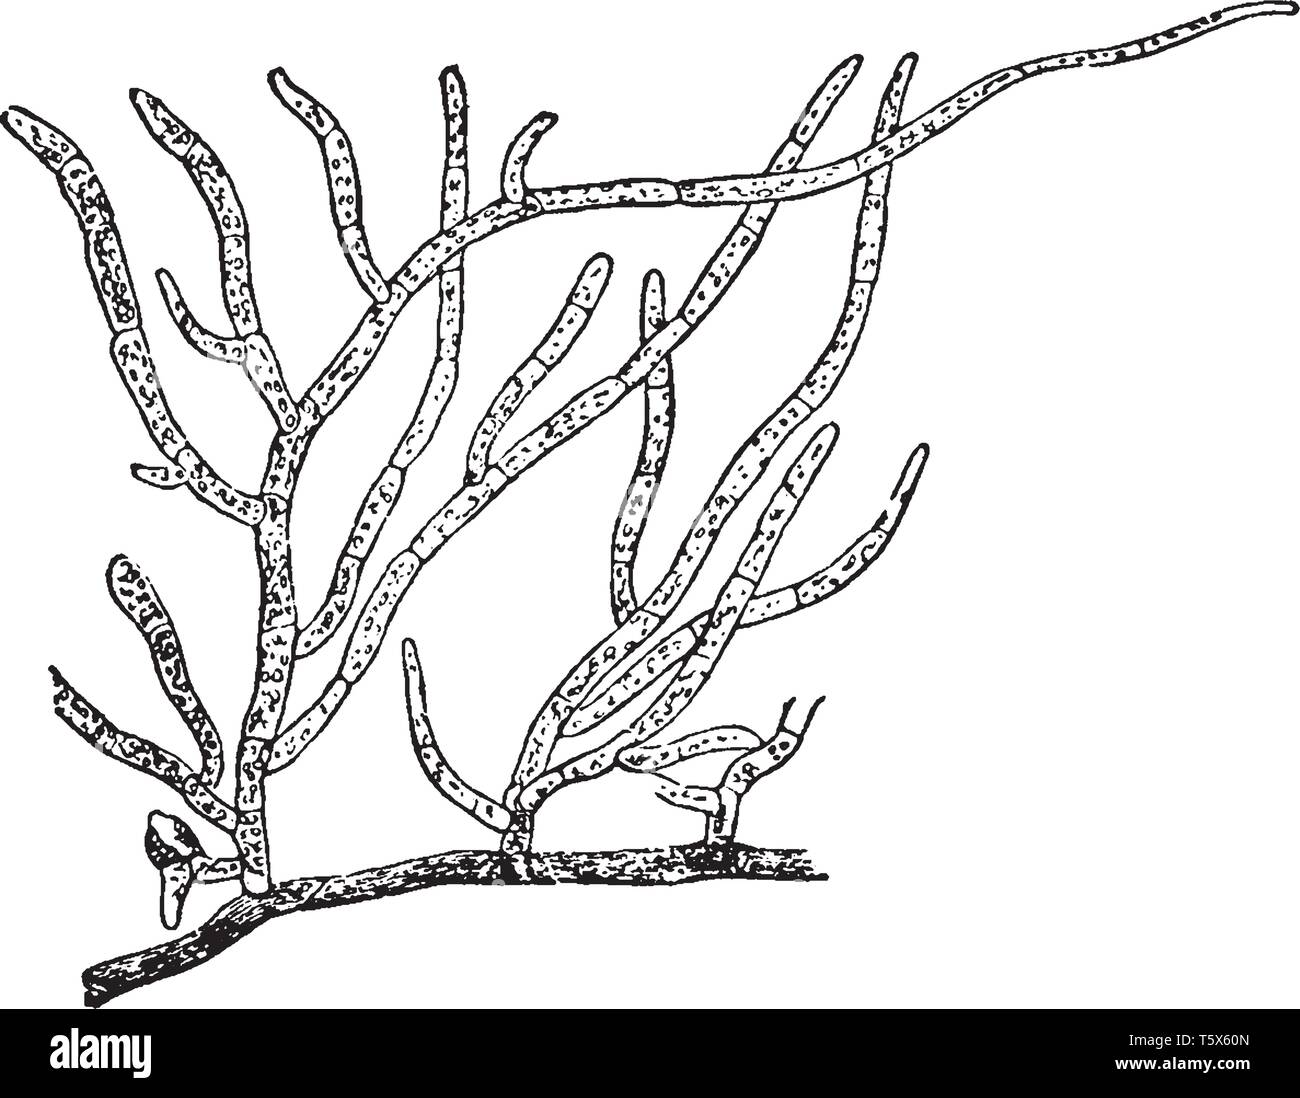 Funaria hygrometrica grows on moist shady, damp soil and also occur on moist wall, vintage line drawing or engraving illustration. Stock Vector